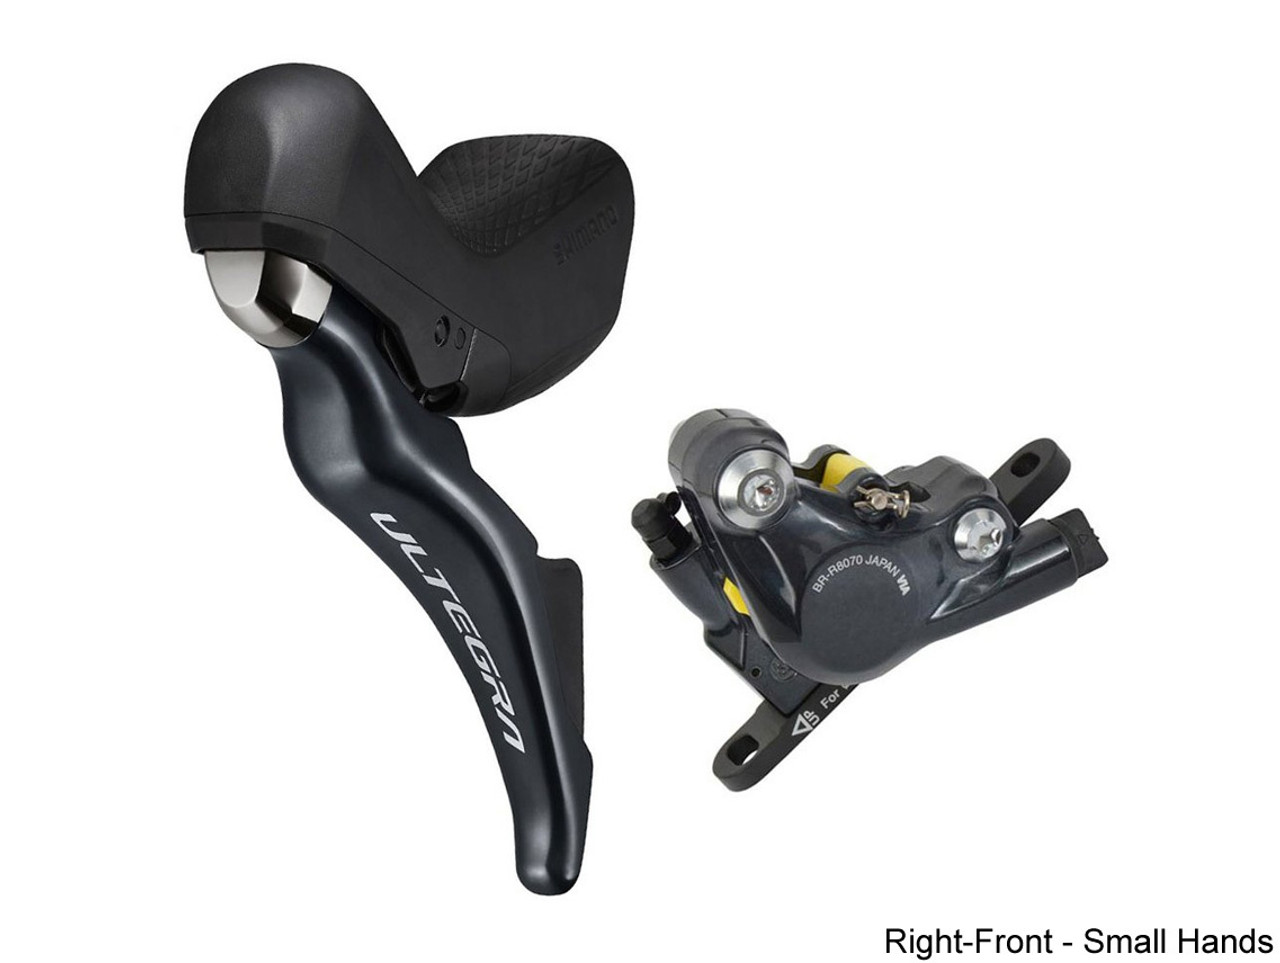 Shimano Ultegra ST-R8025 11 Speed Hydro Shifter with BR-8070 Caliper